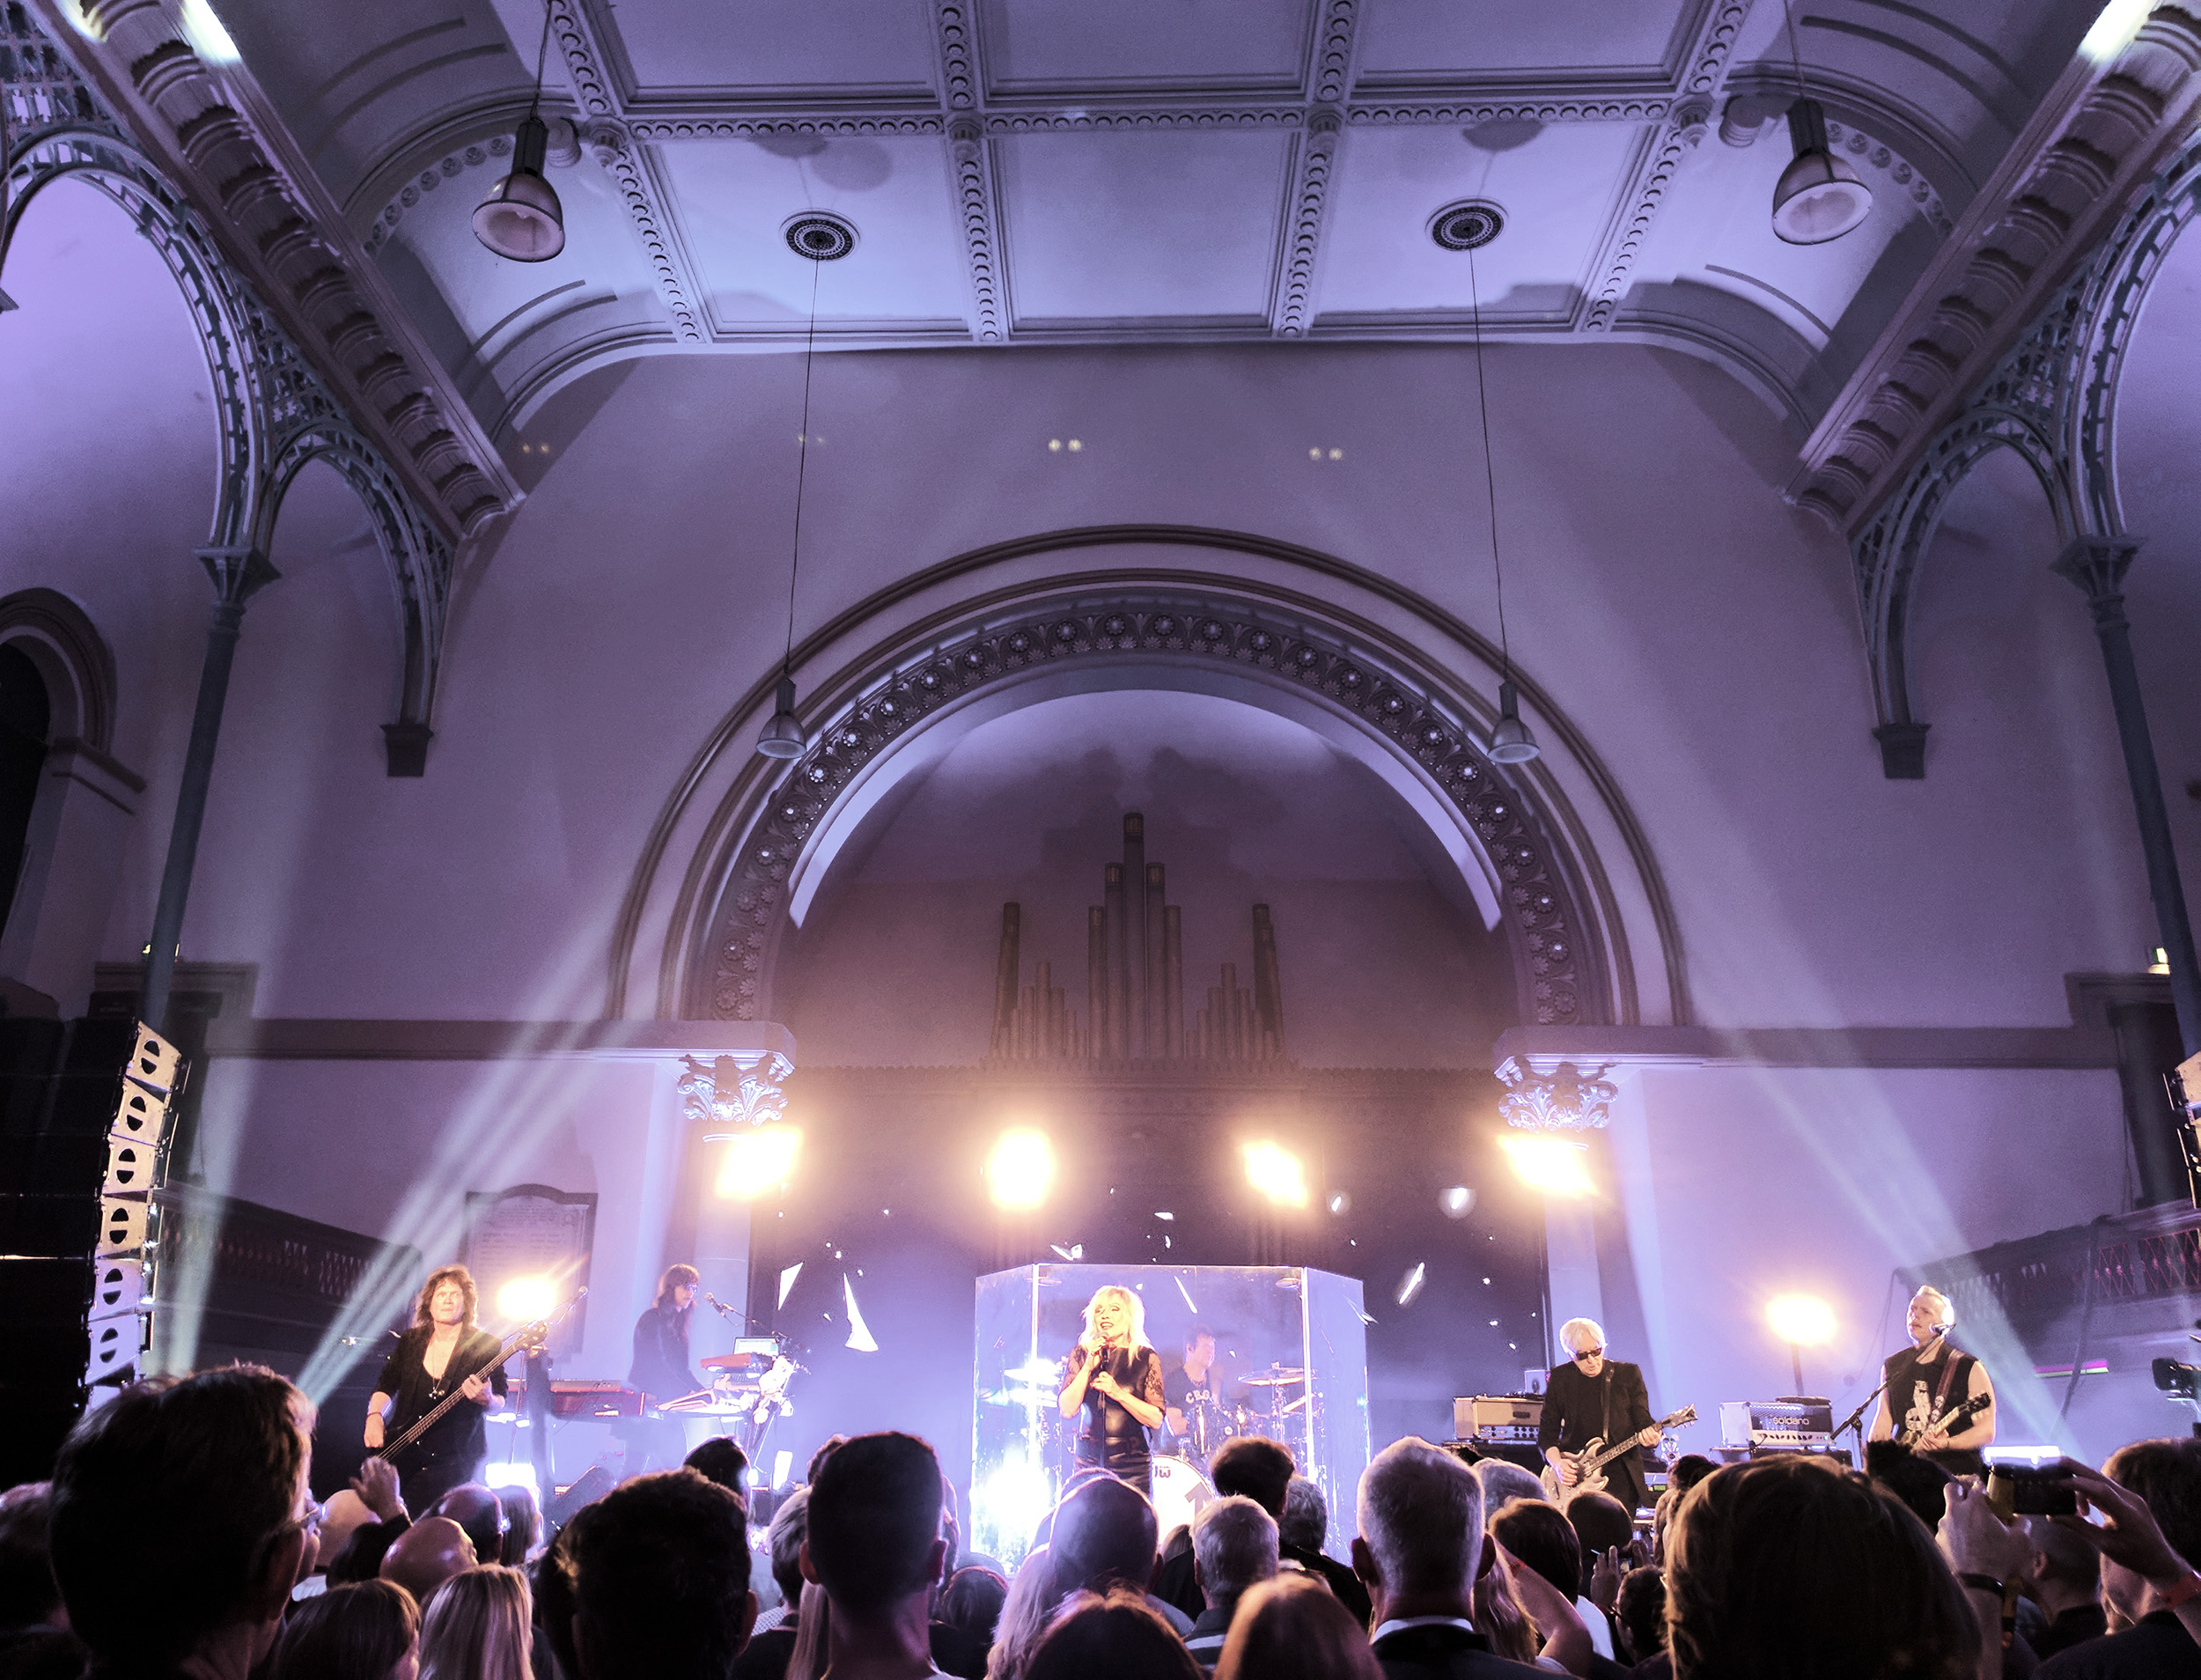 I Went to See Blondie in a Church